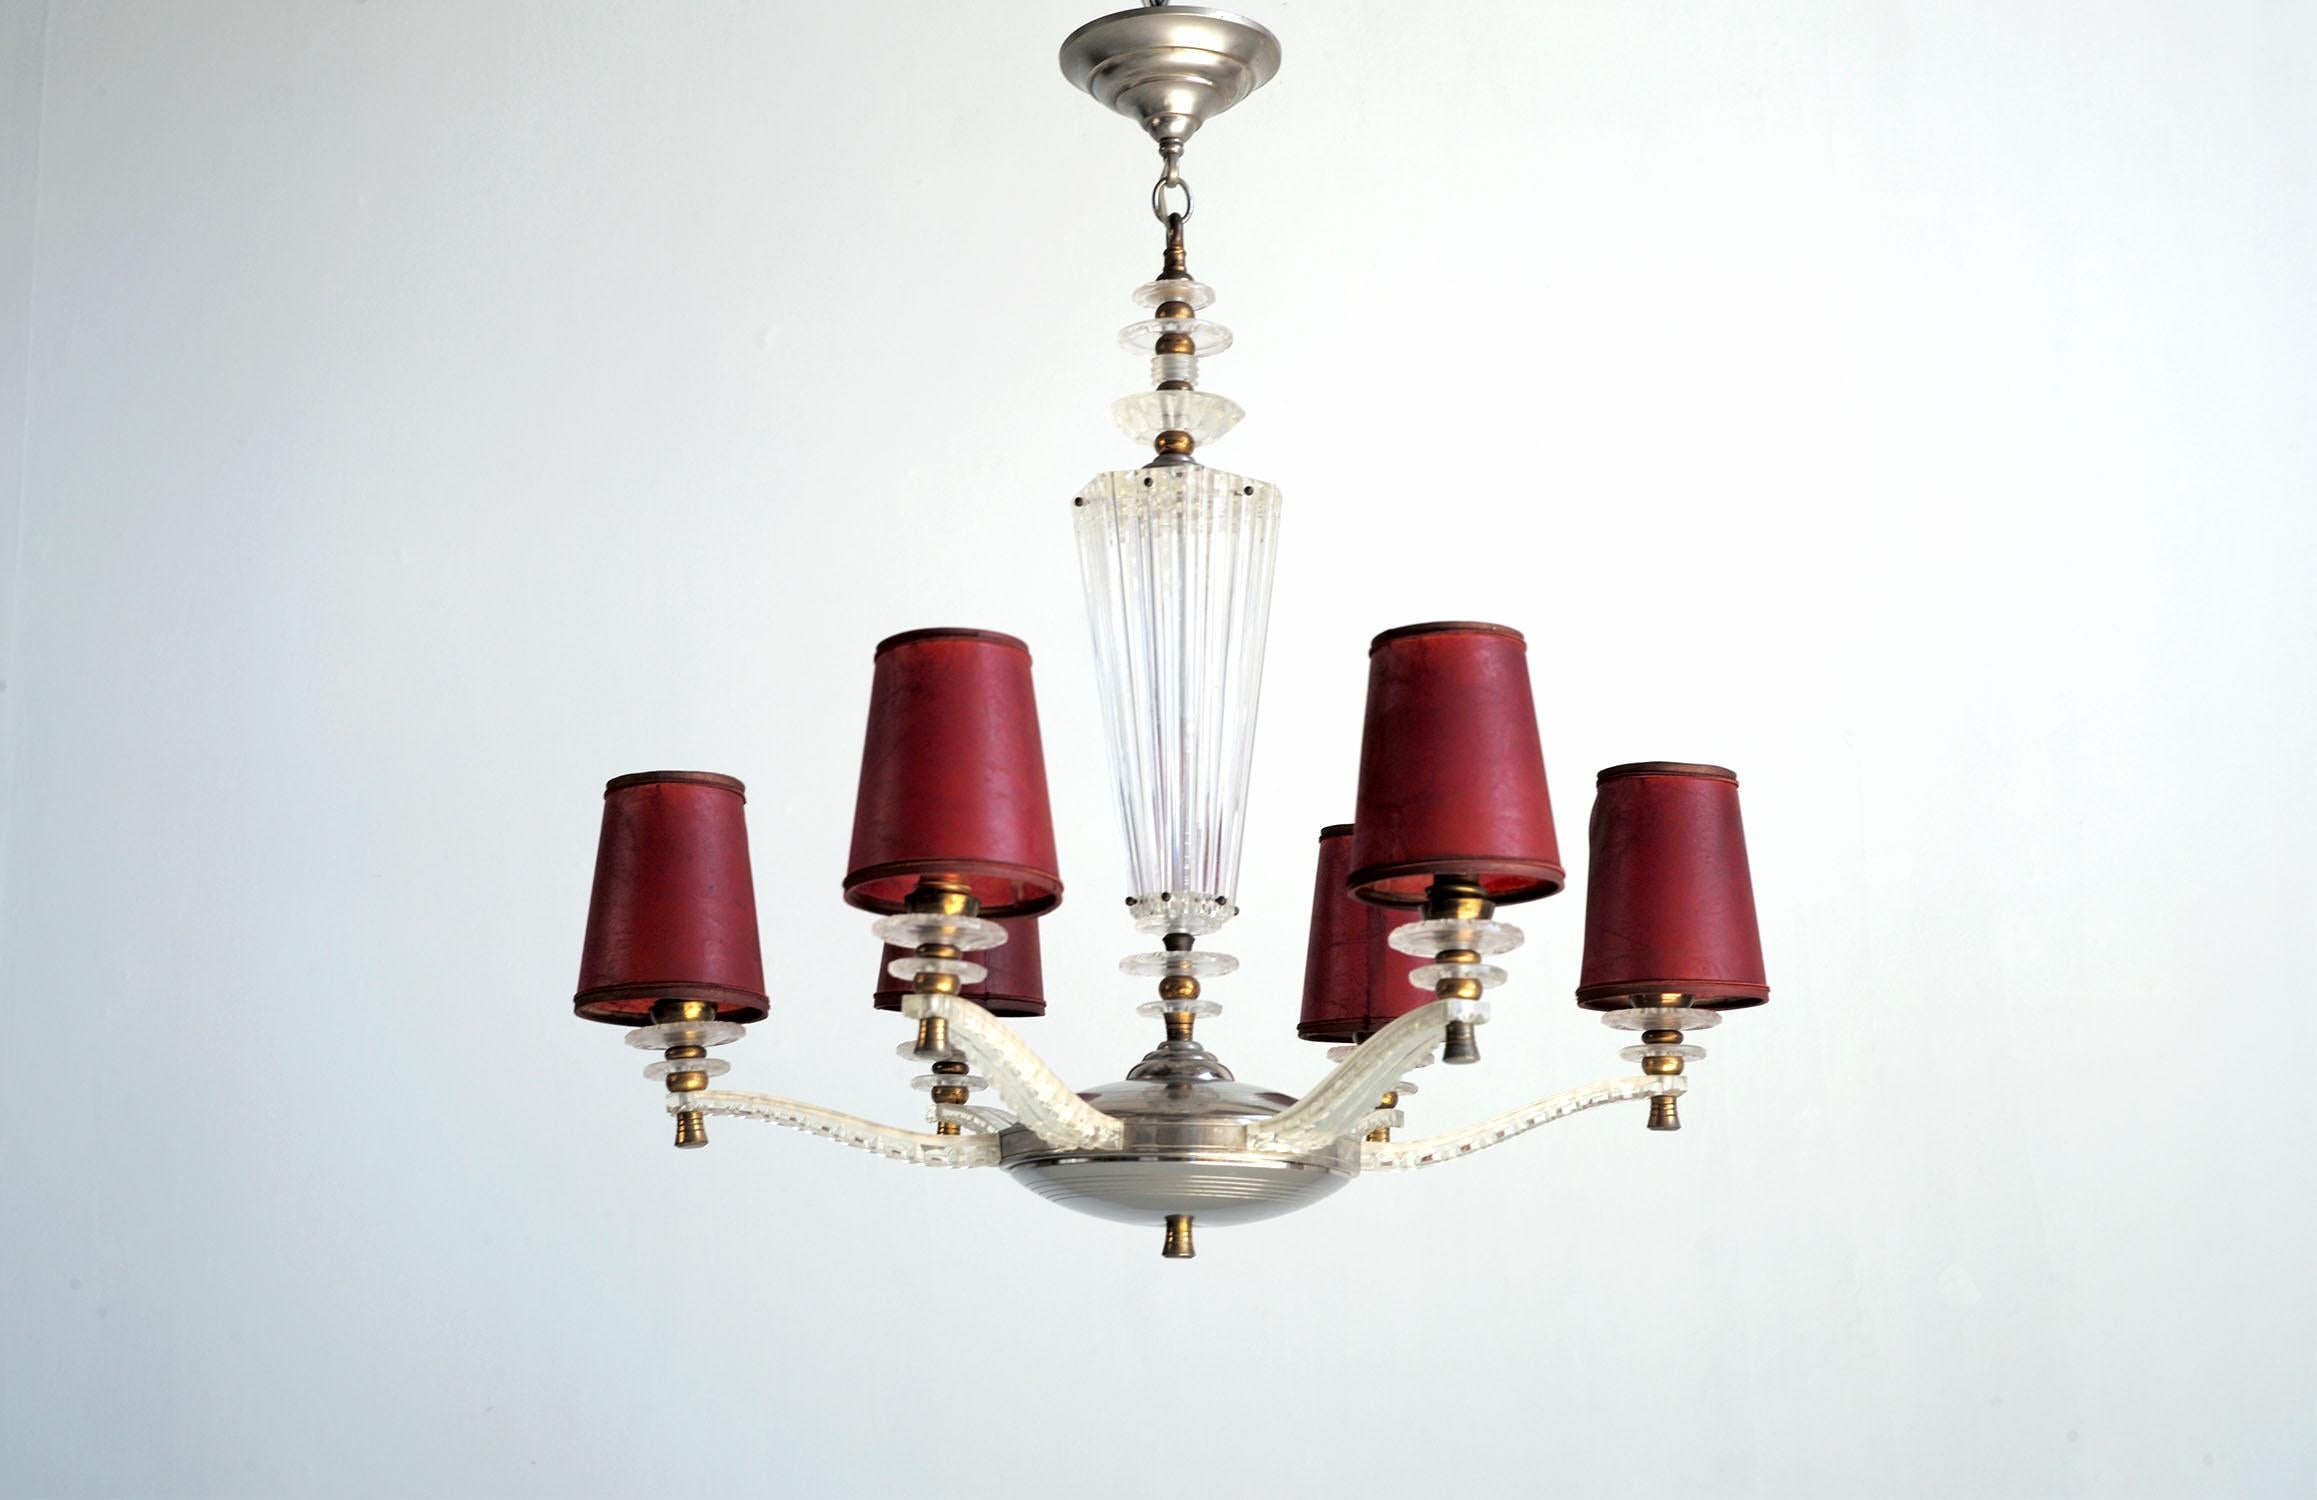 Chandelier with 6 sconces, France 1950. Enhanced with gilded and chromed brass parts, this methyl methacrylate luminaire insolently imitates the neo-classical chandeliers of the 1930s. The clip-on lampshades are in blushed parchment. 